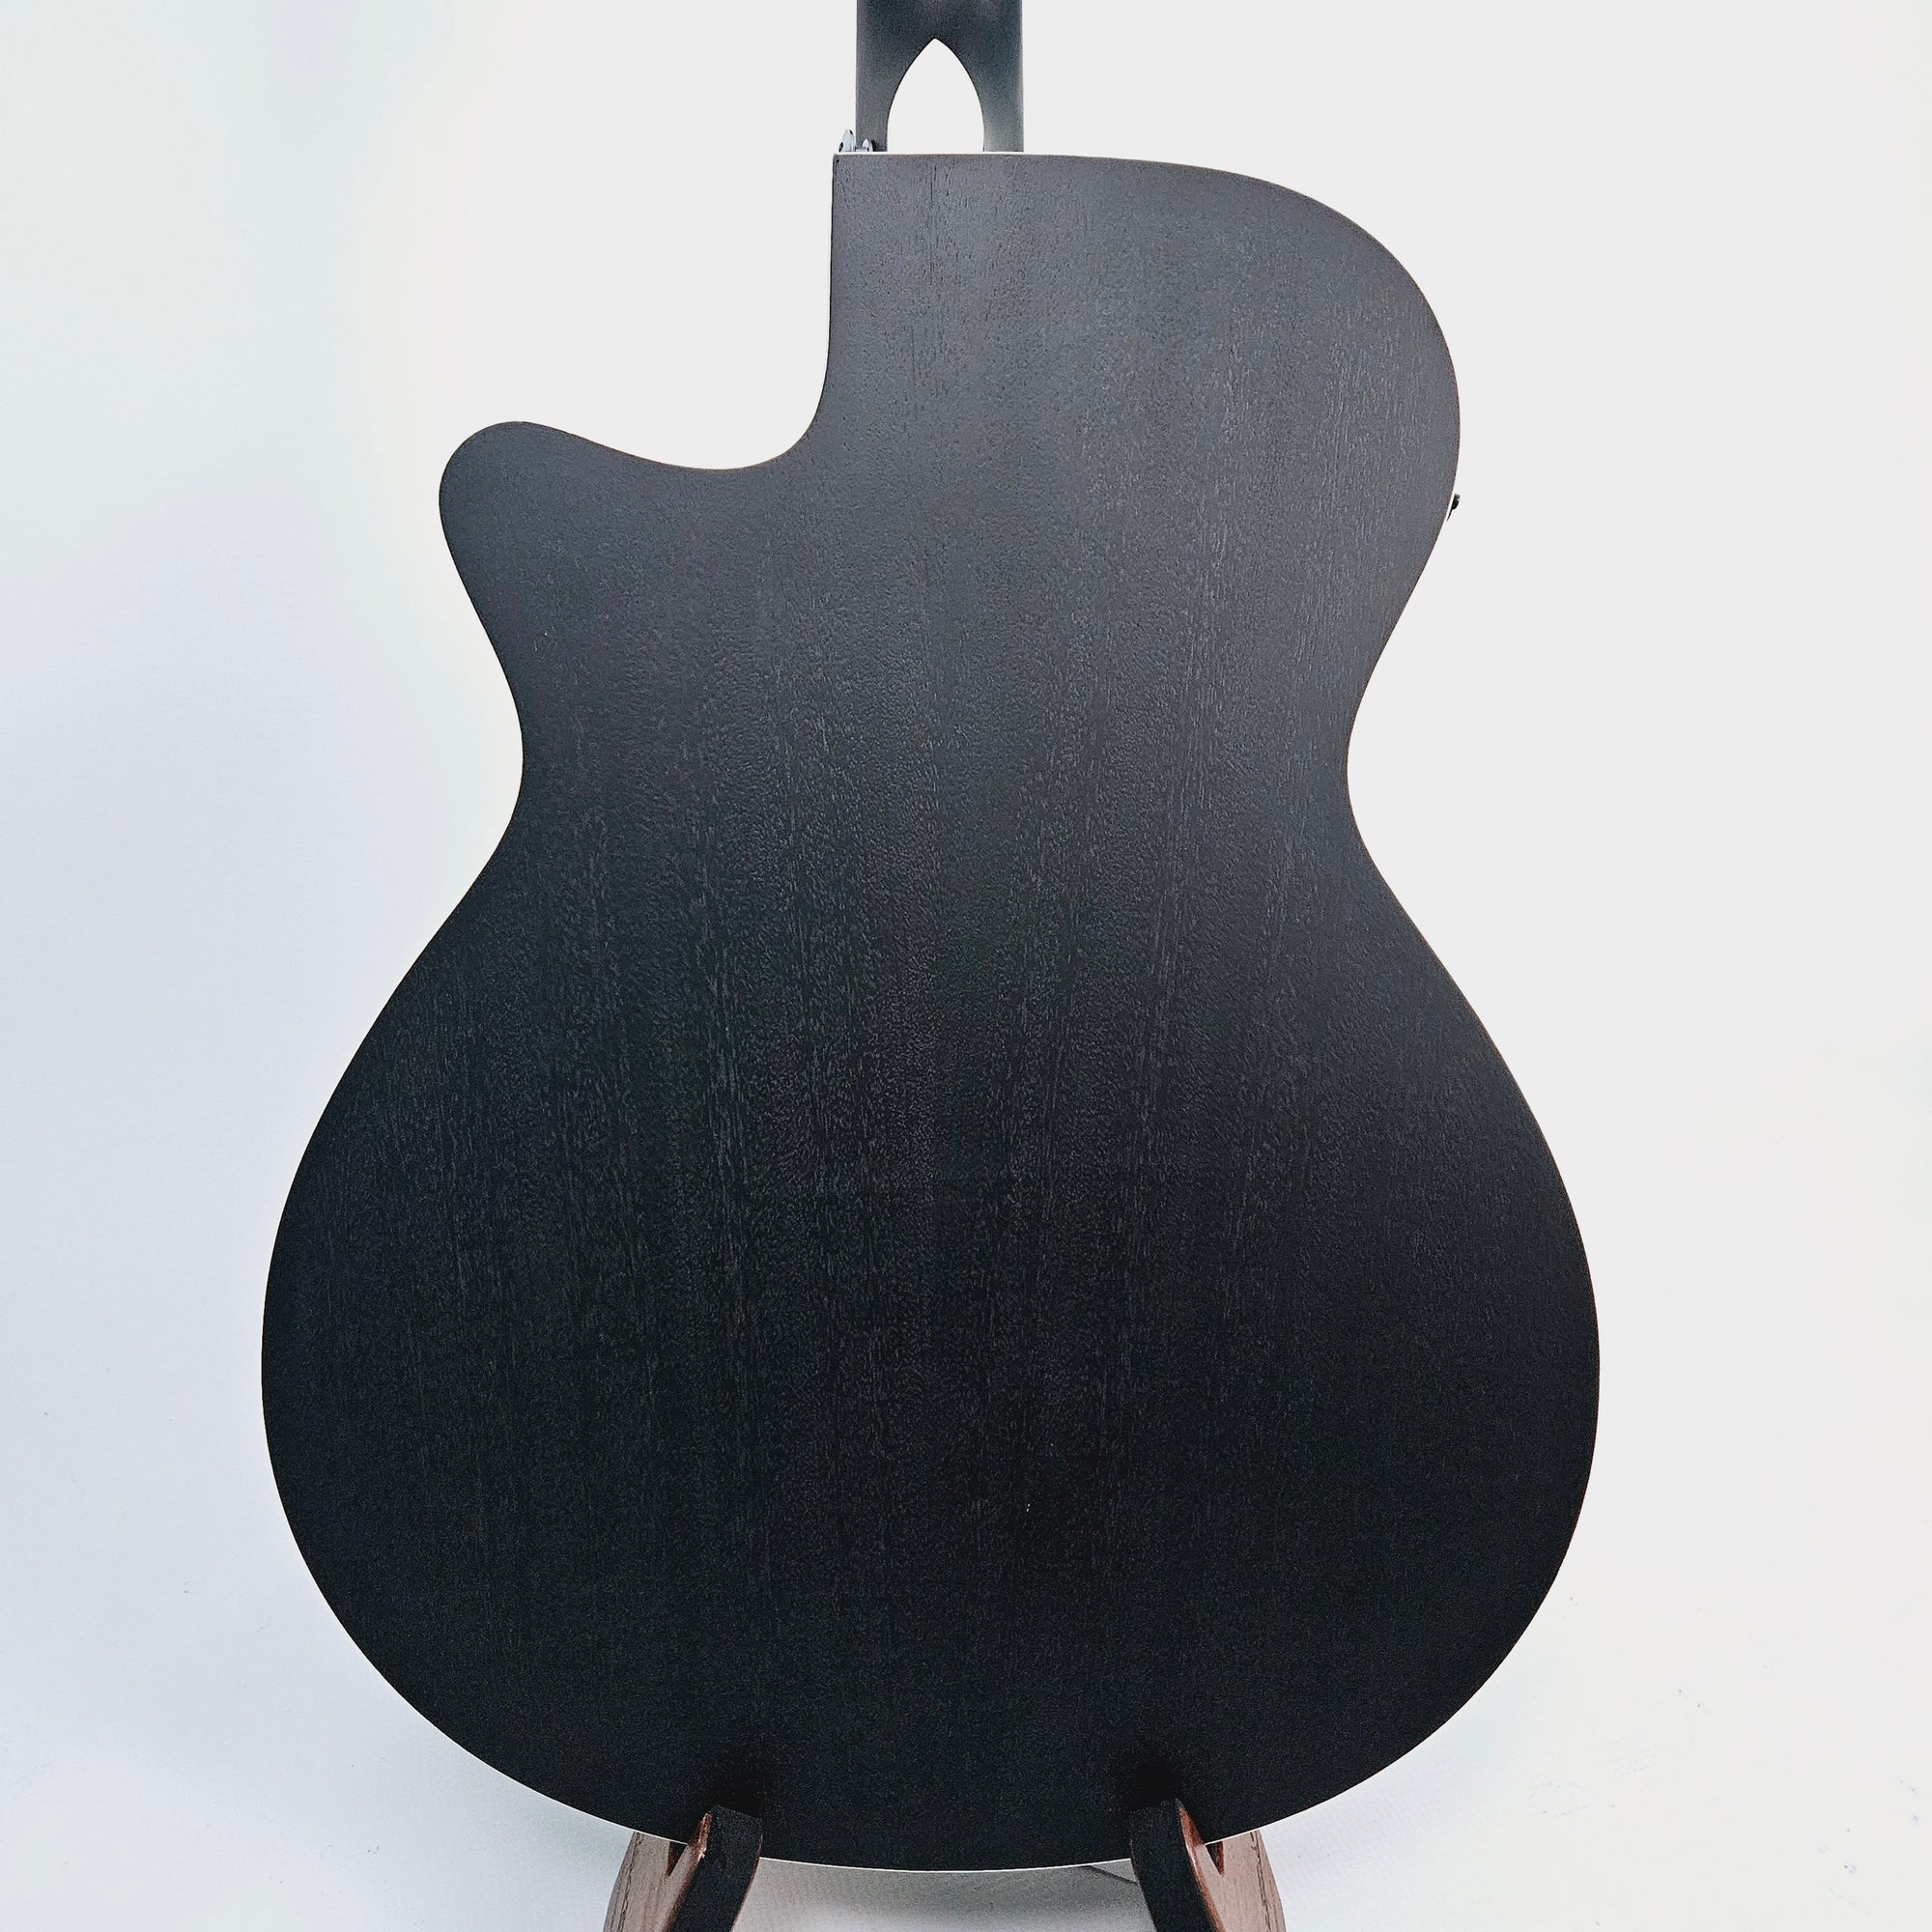 Ibanez Acoustic Electric Guitar - Weathered Black AEG7MHWK Body Back View